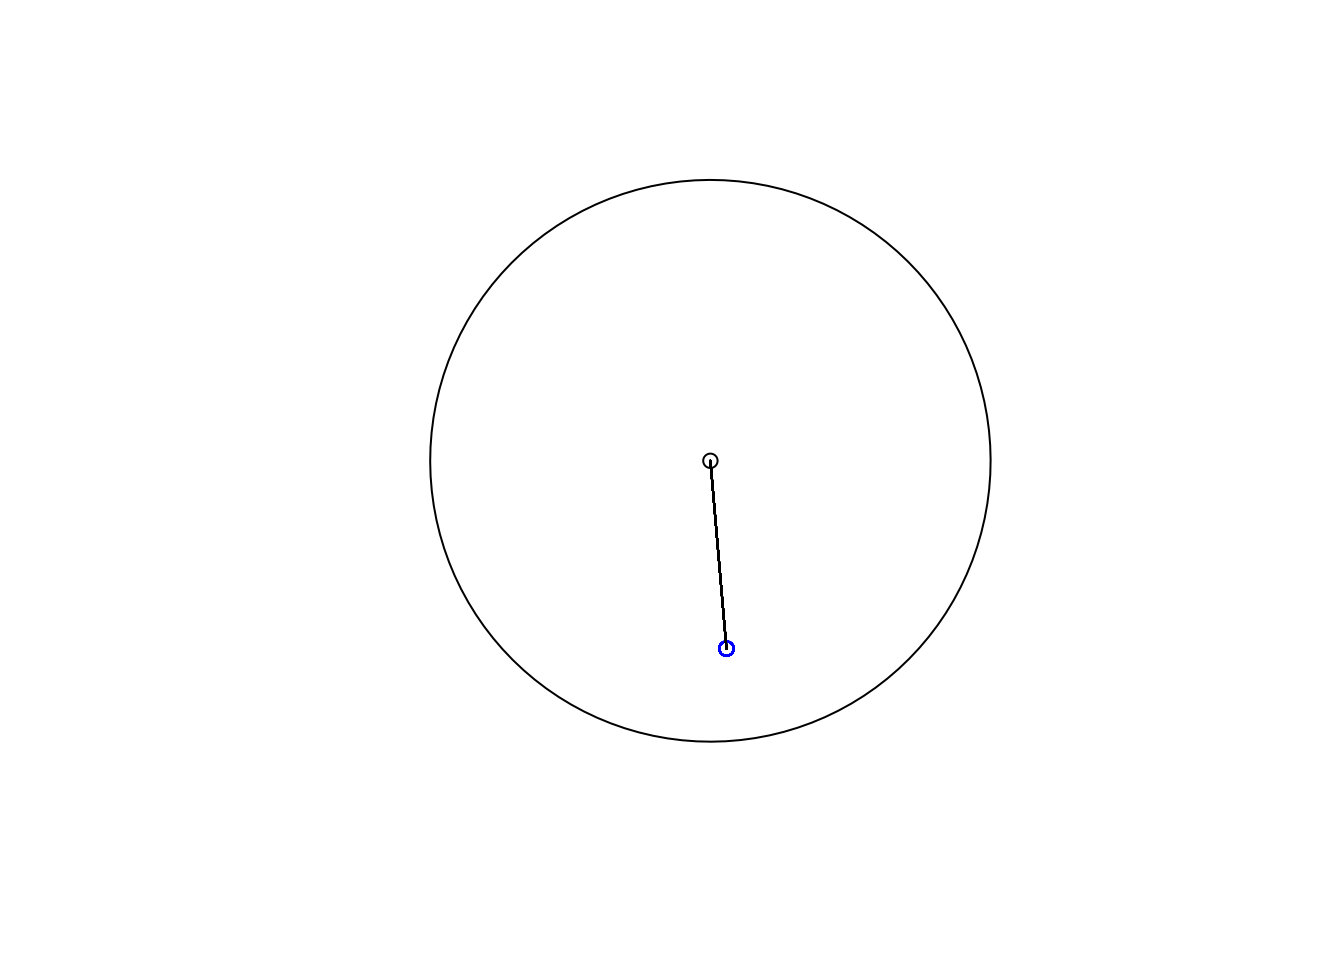 A small black circle is the centrepoint for a very large black circle. A small blue circle is within this larger circle, and a line connects it to the small black circle.